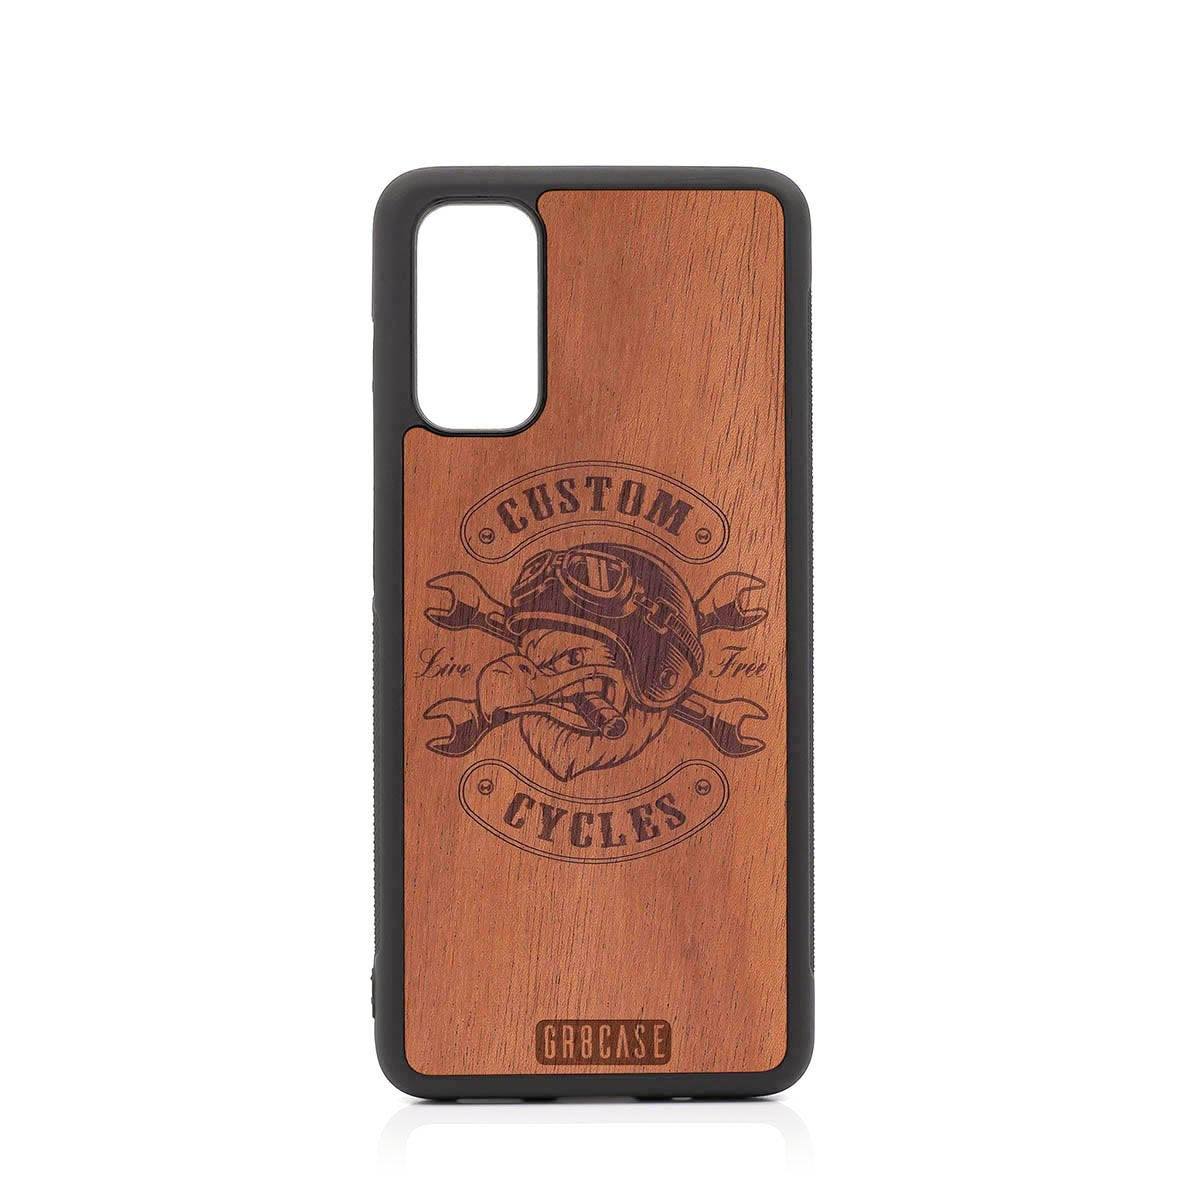 Custom Cycles Live Free (Biker Eagle) Design Wood Case For Samsung Galaxy S20 FE 5G by GR8CASE